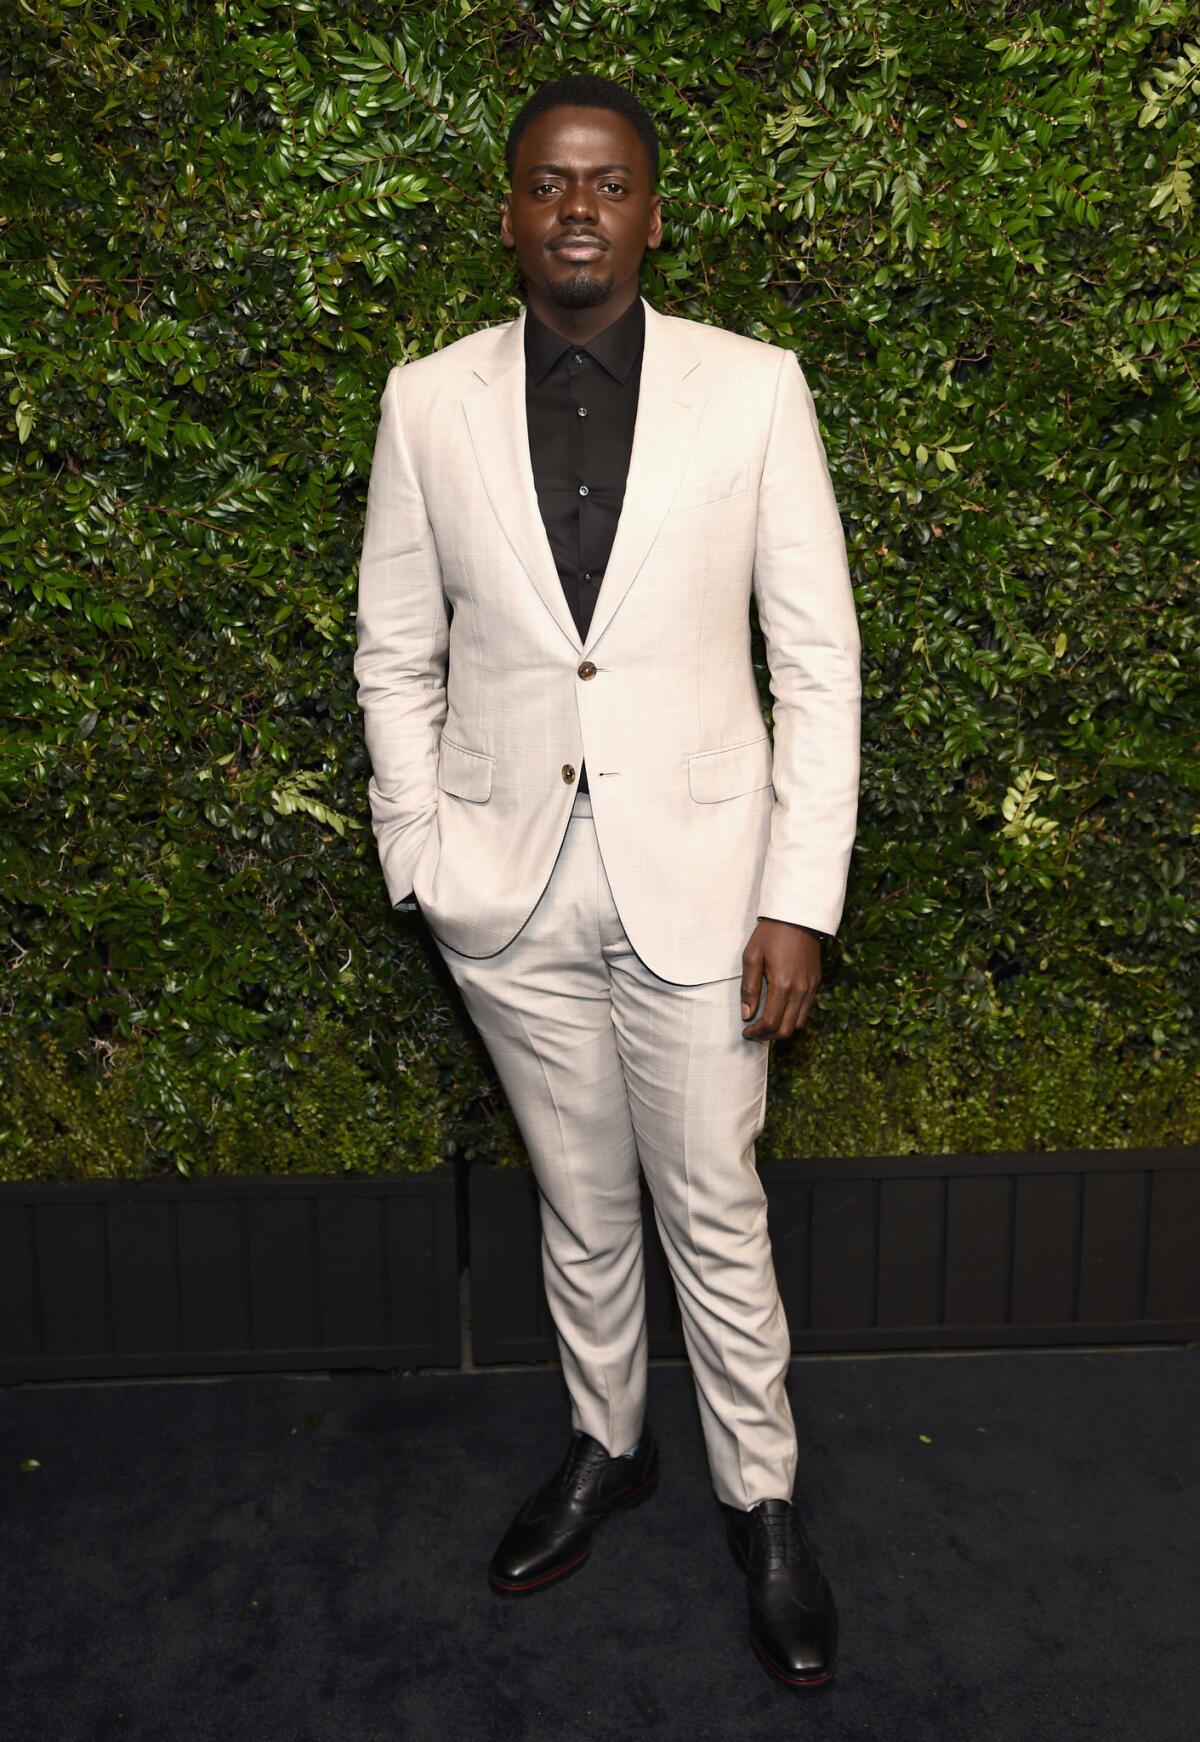 Daniel Kaluuya attends the Charles Finch and Chanel pre-Oscars dinner in West Hollywood.